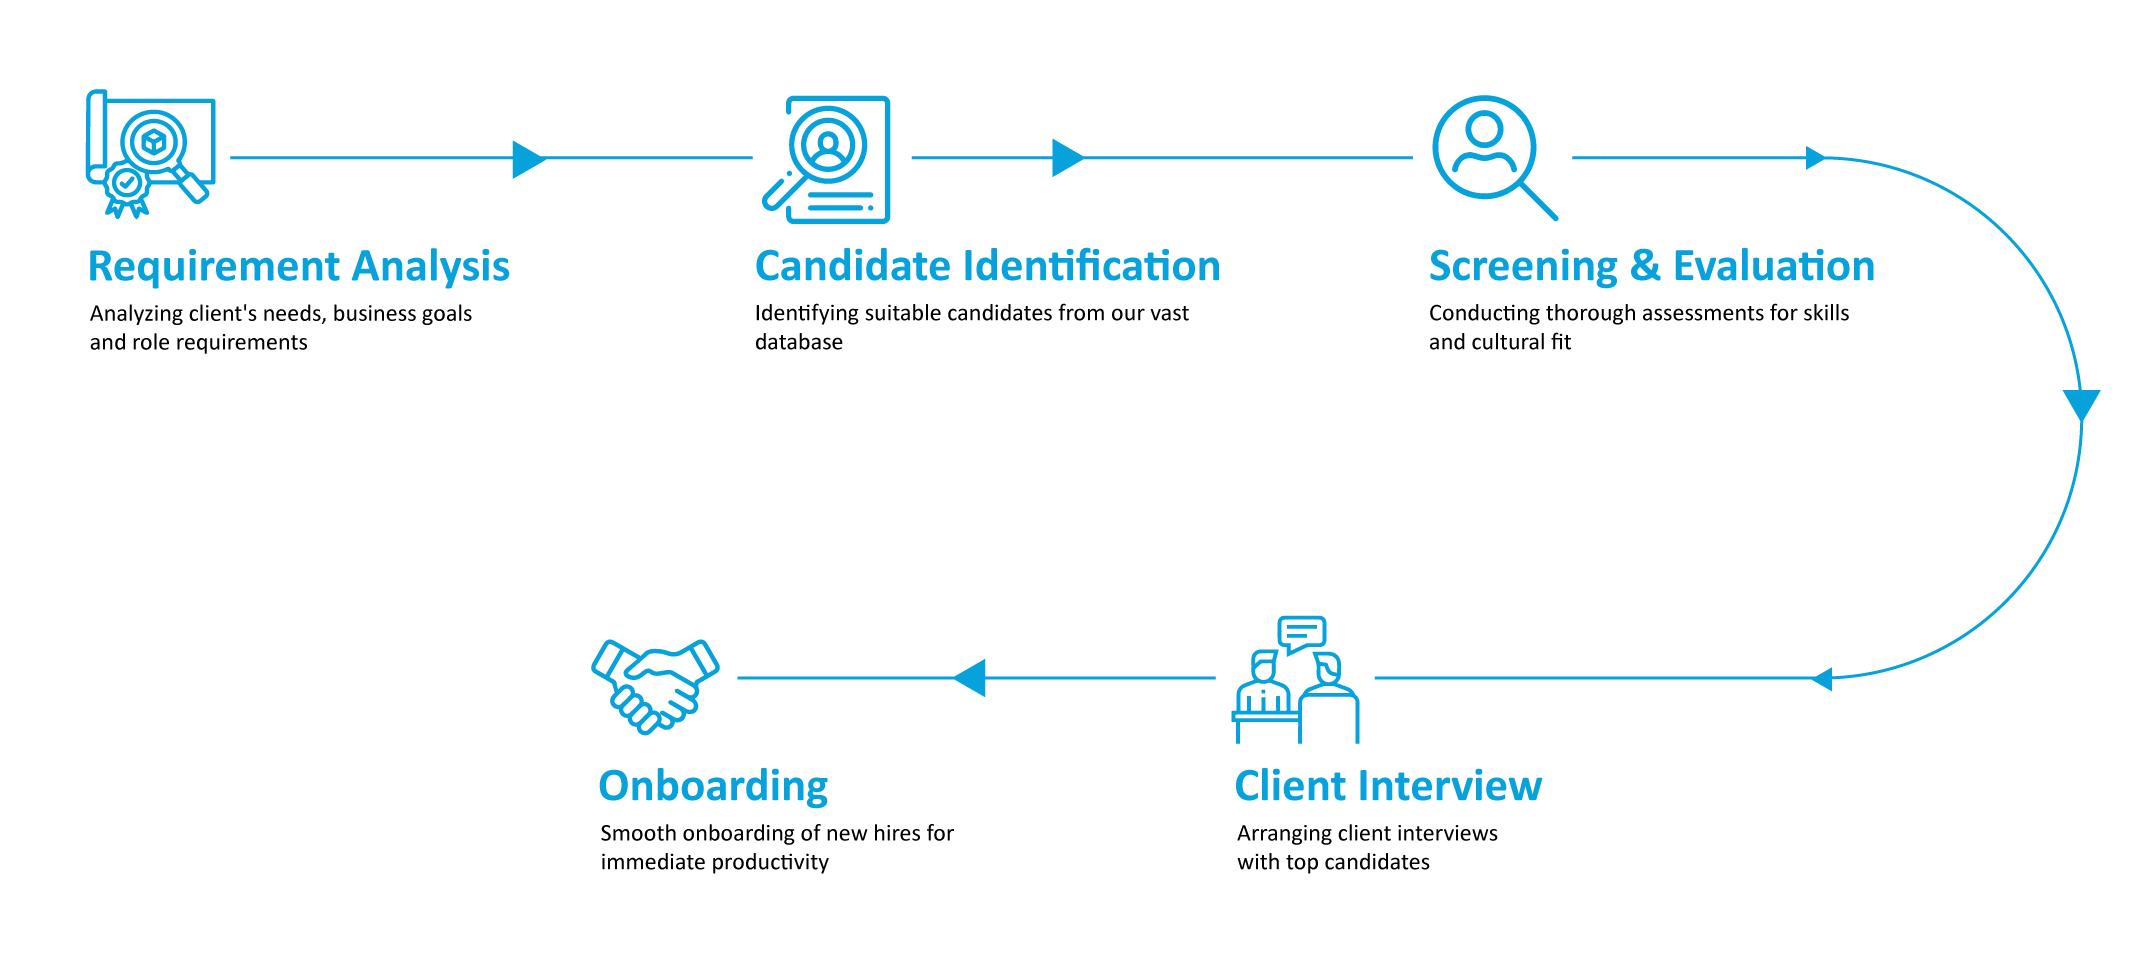 OUR CUSTOM STAFFING PROCESS